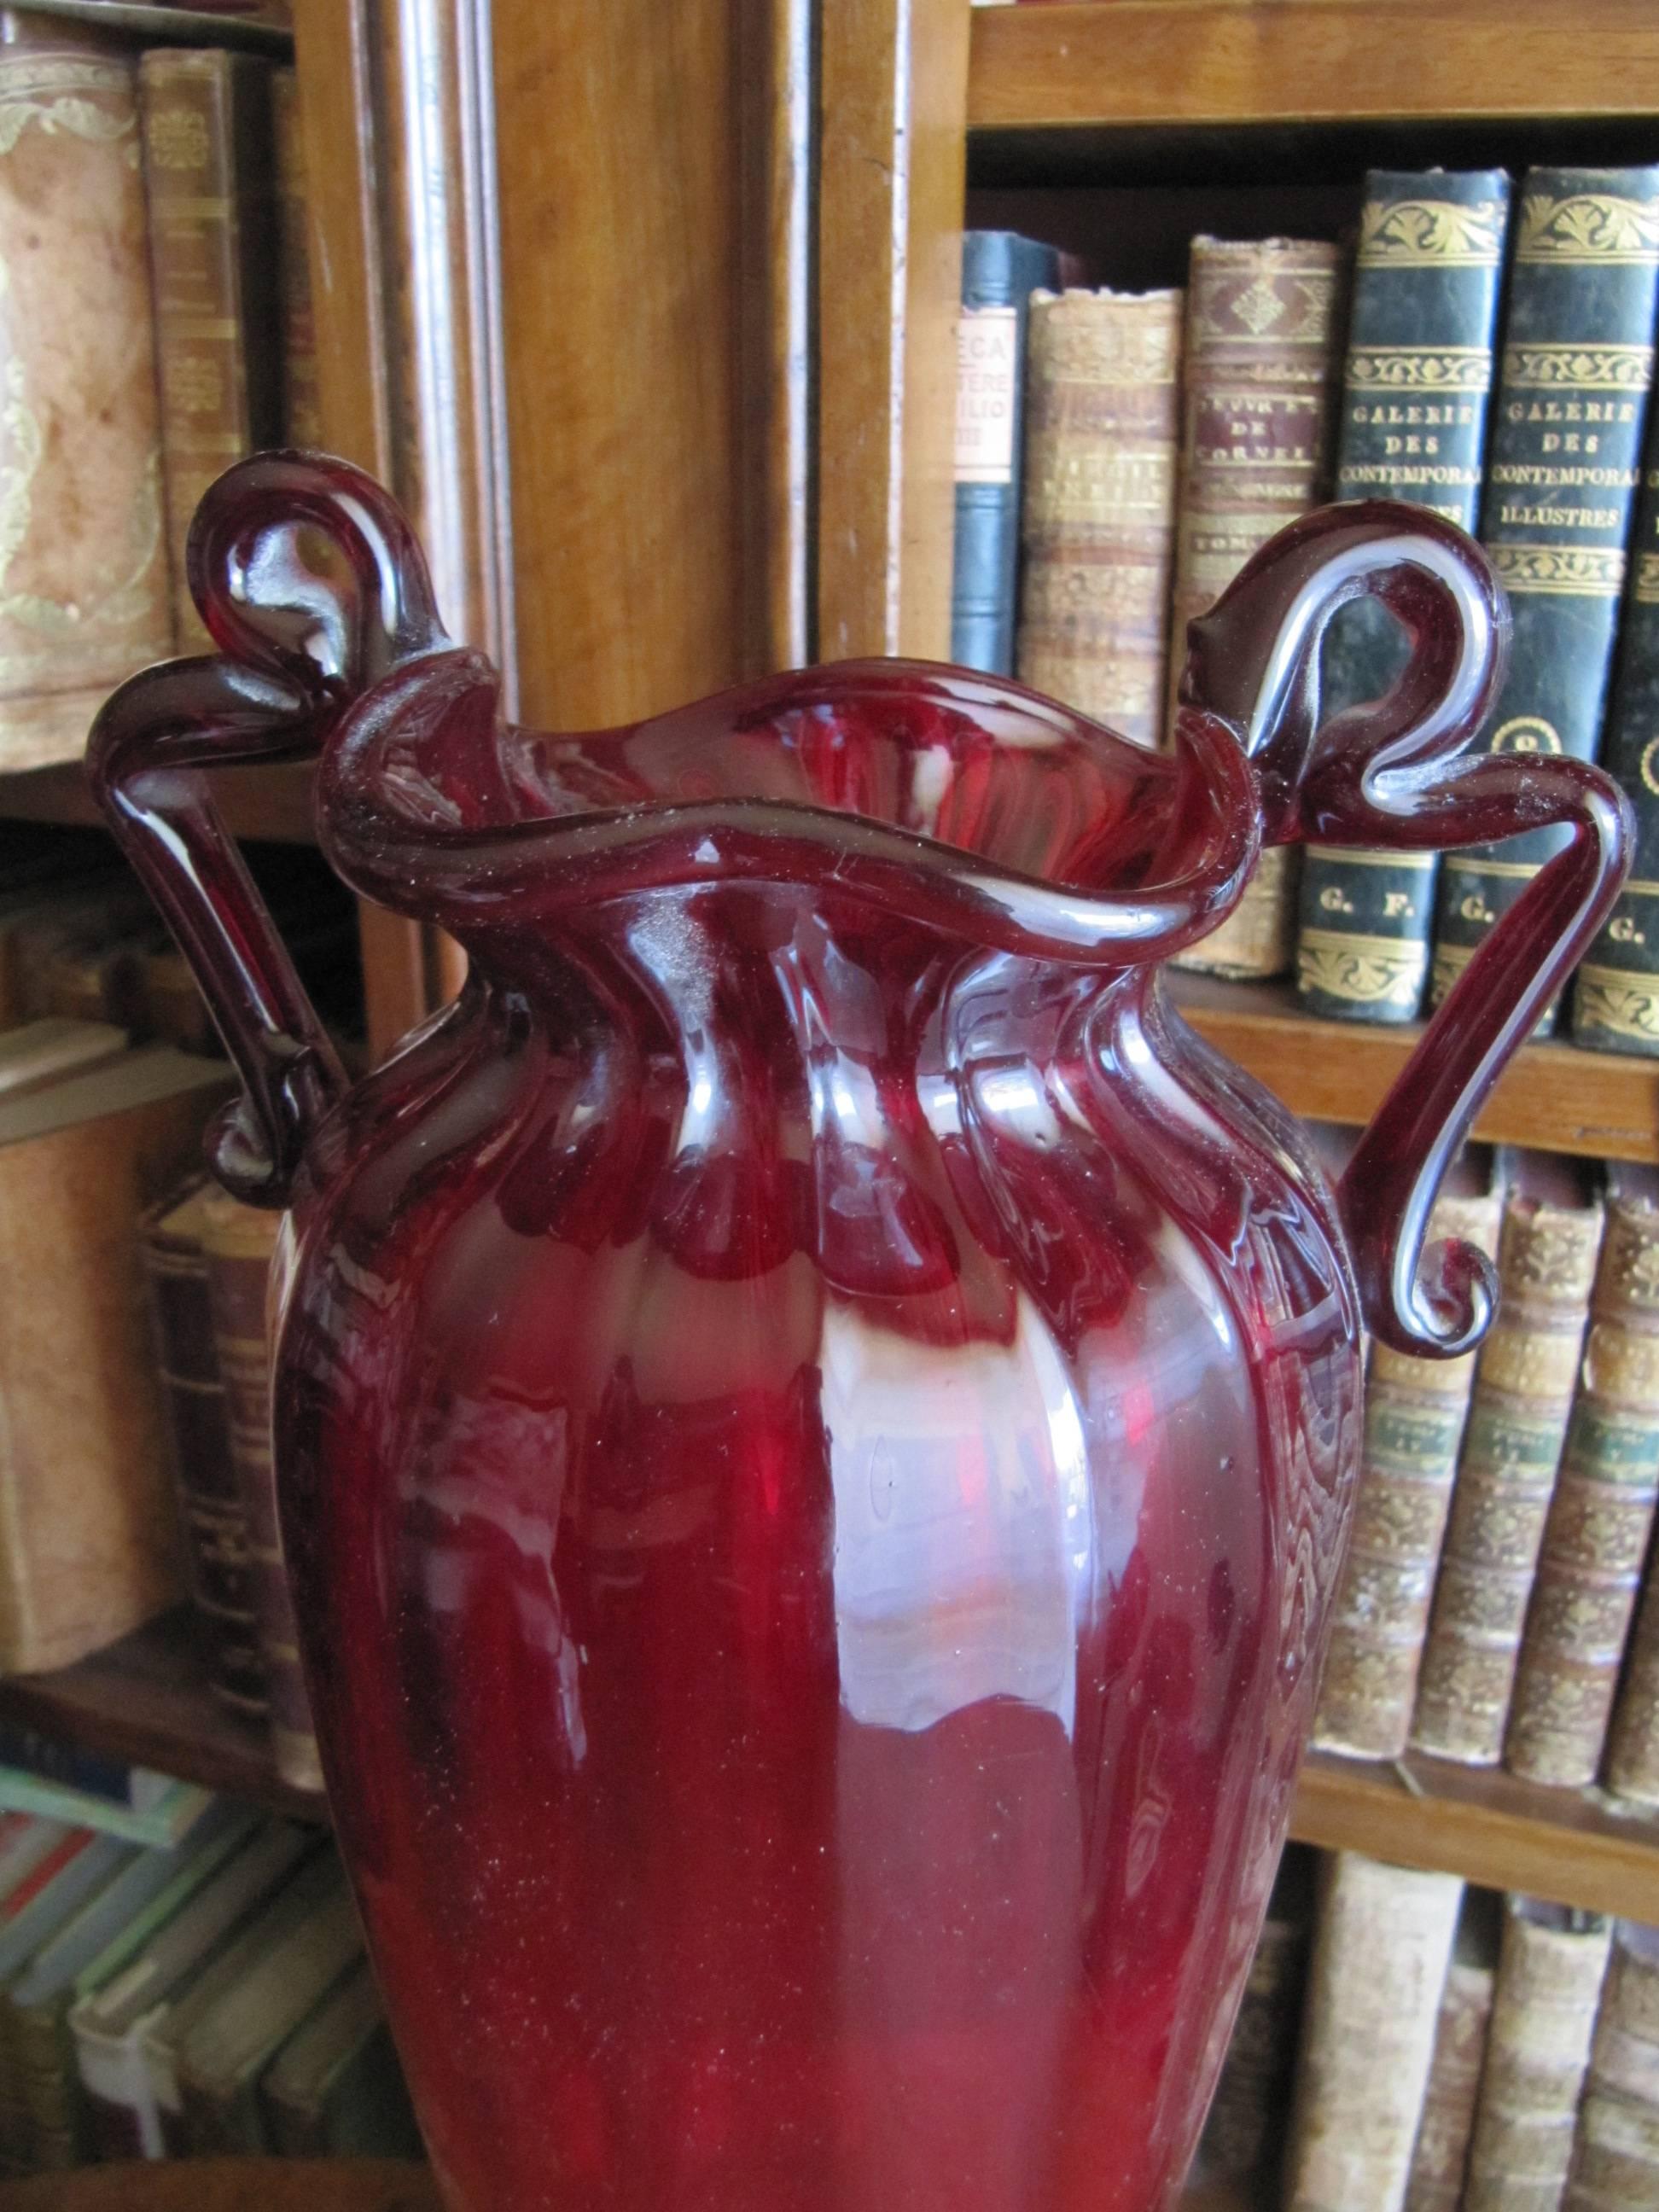 Antique Vase Made of Blown Glass Ruby Red 
ribbed, strangled in the middle 
fully intact